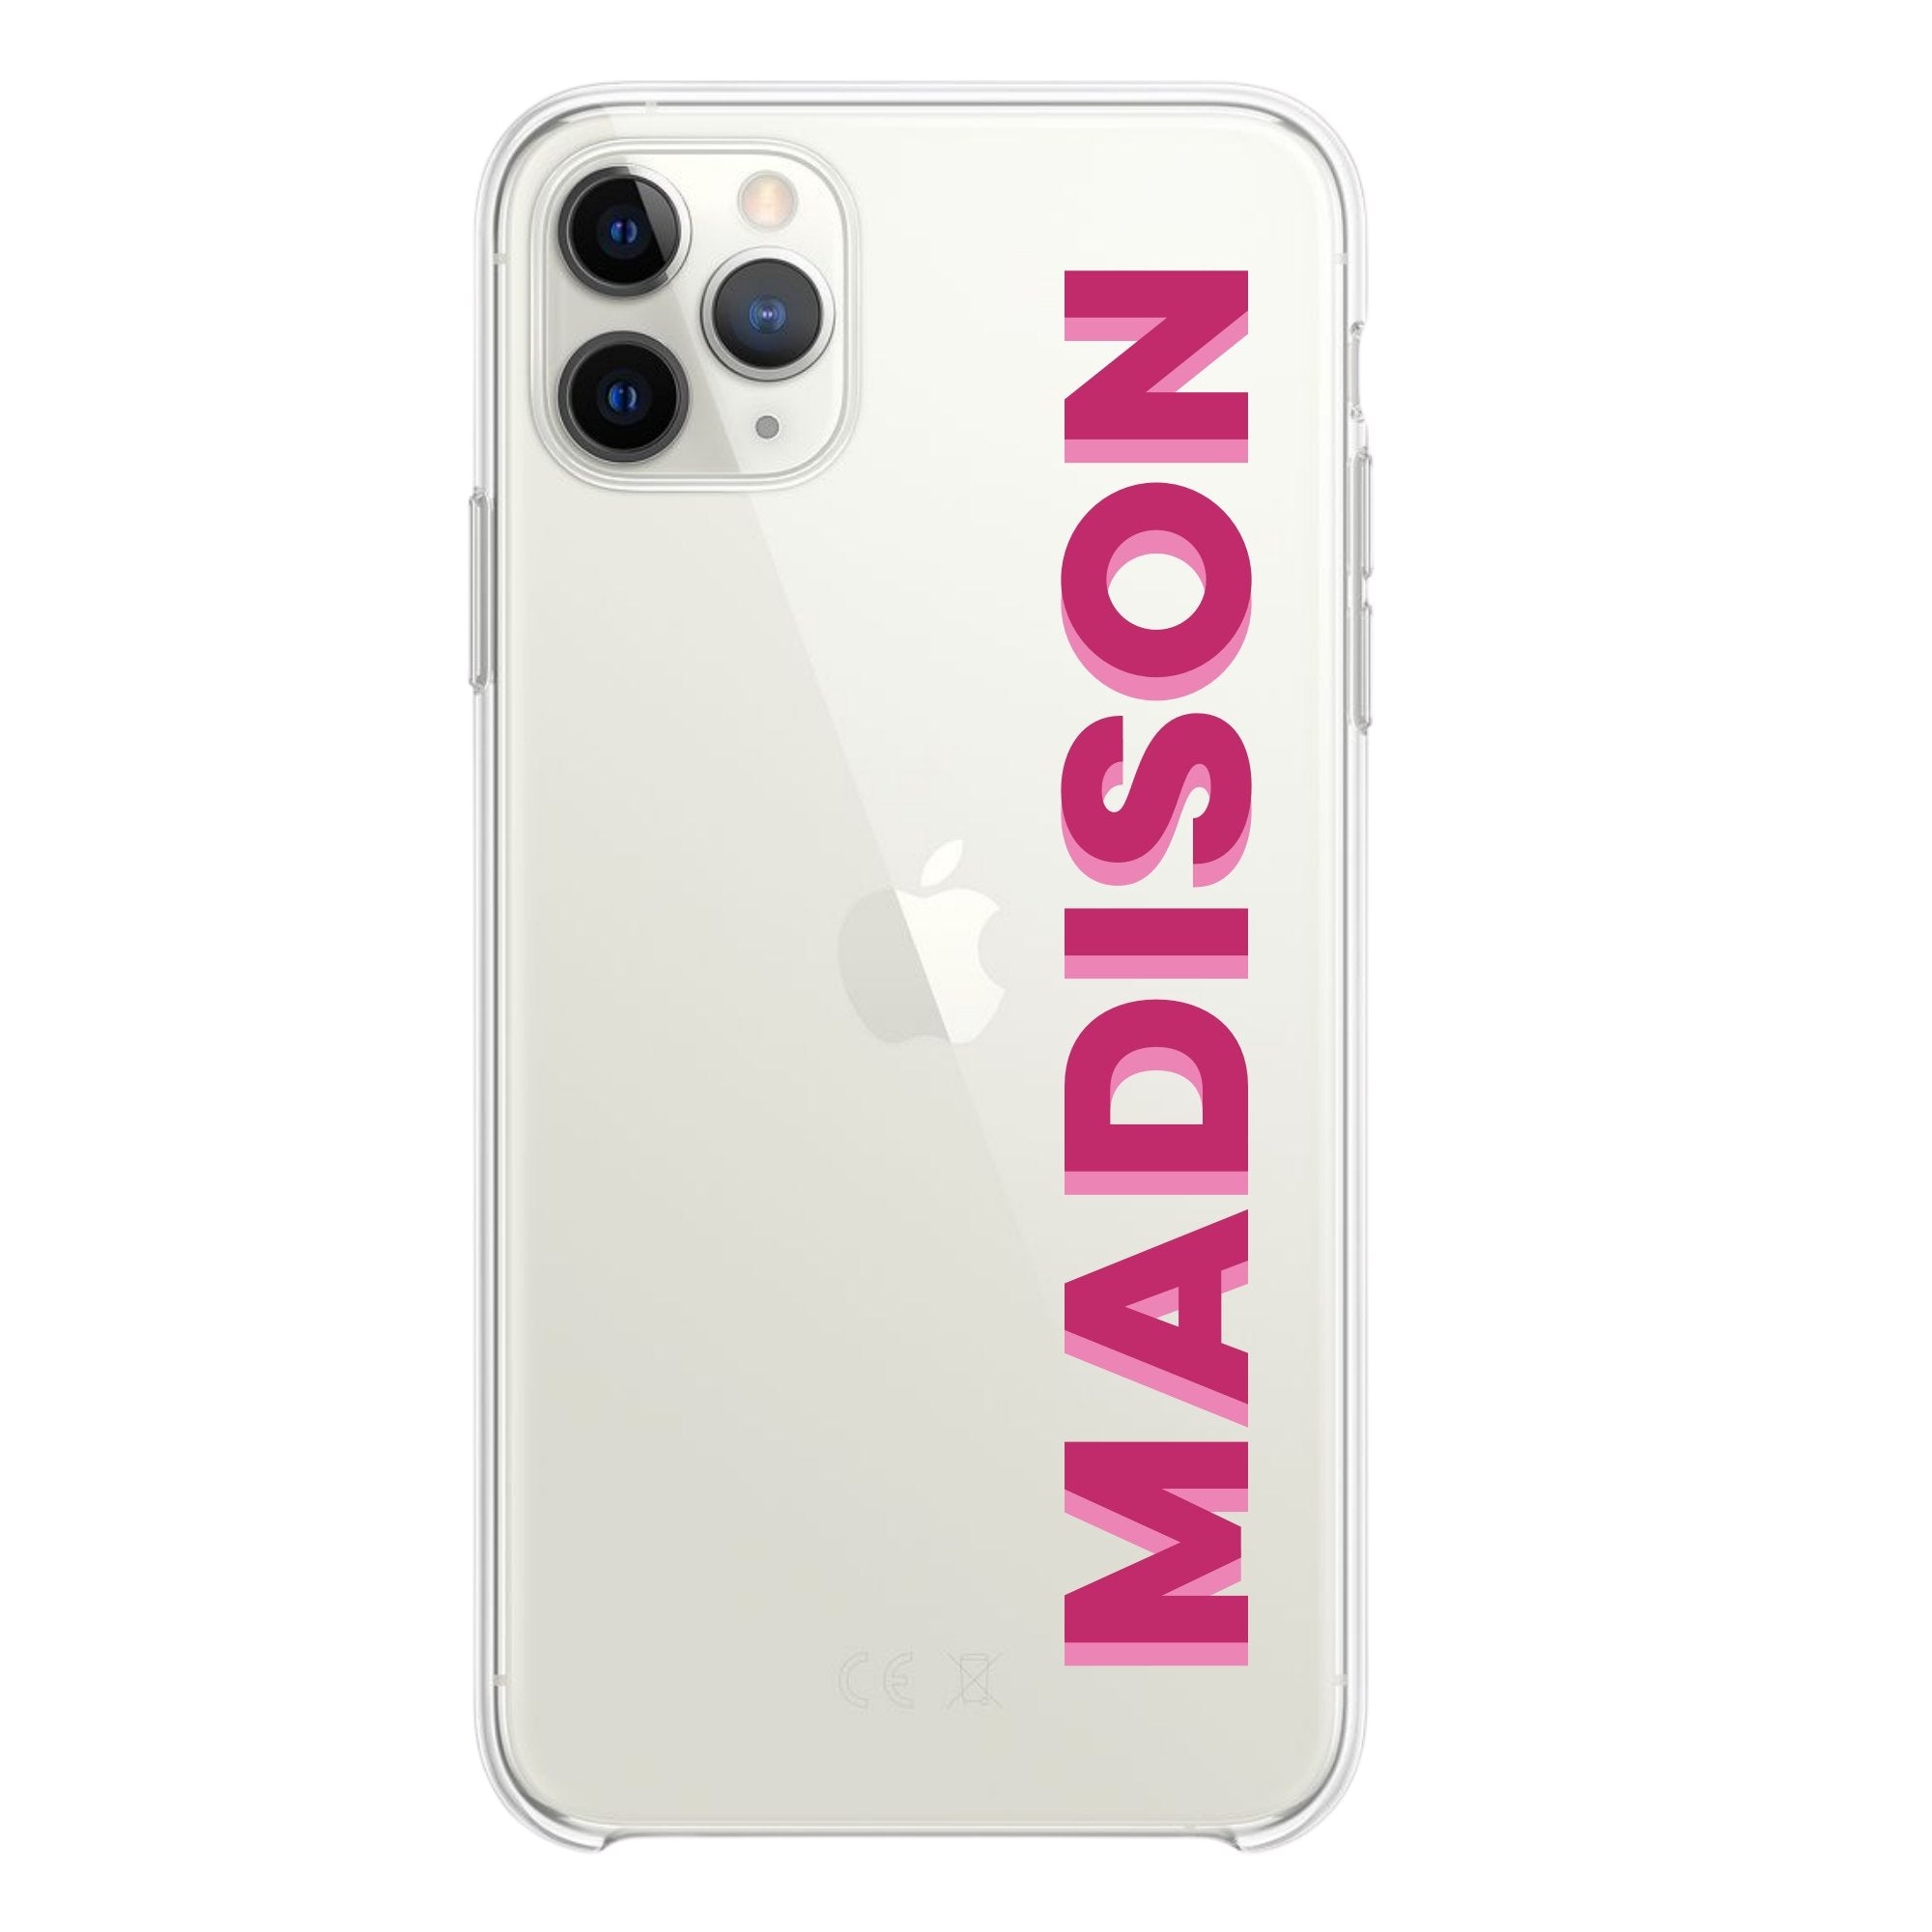 A clear acrylic phone case reads "Madison" in pink